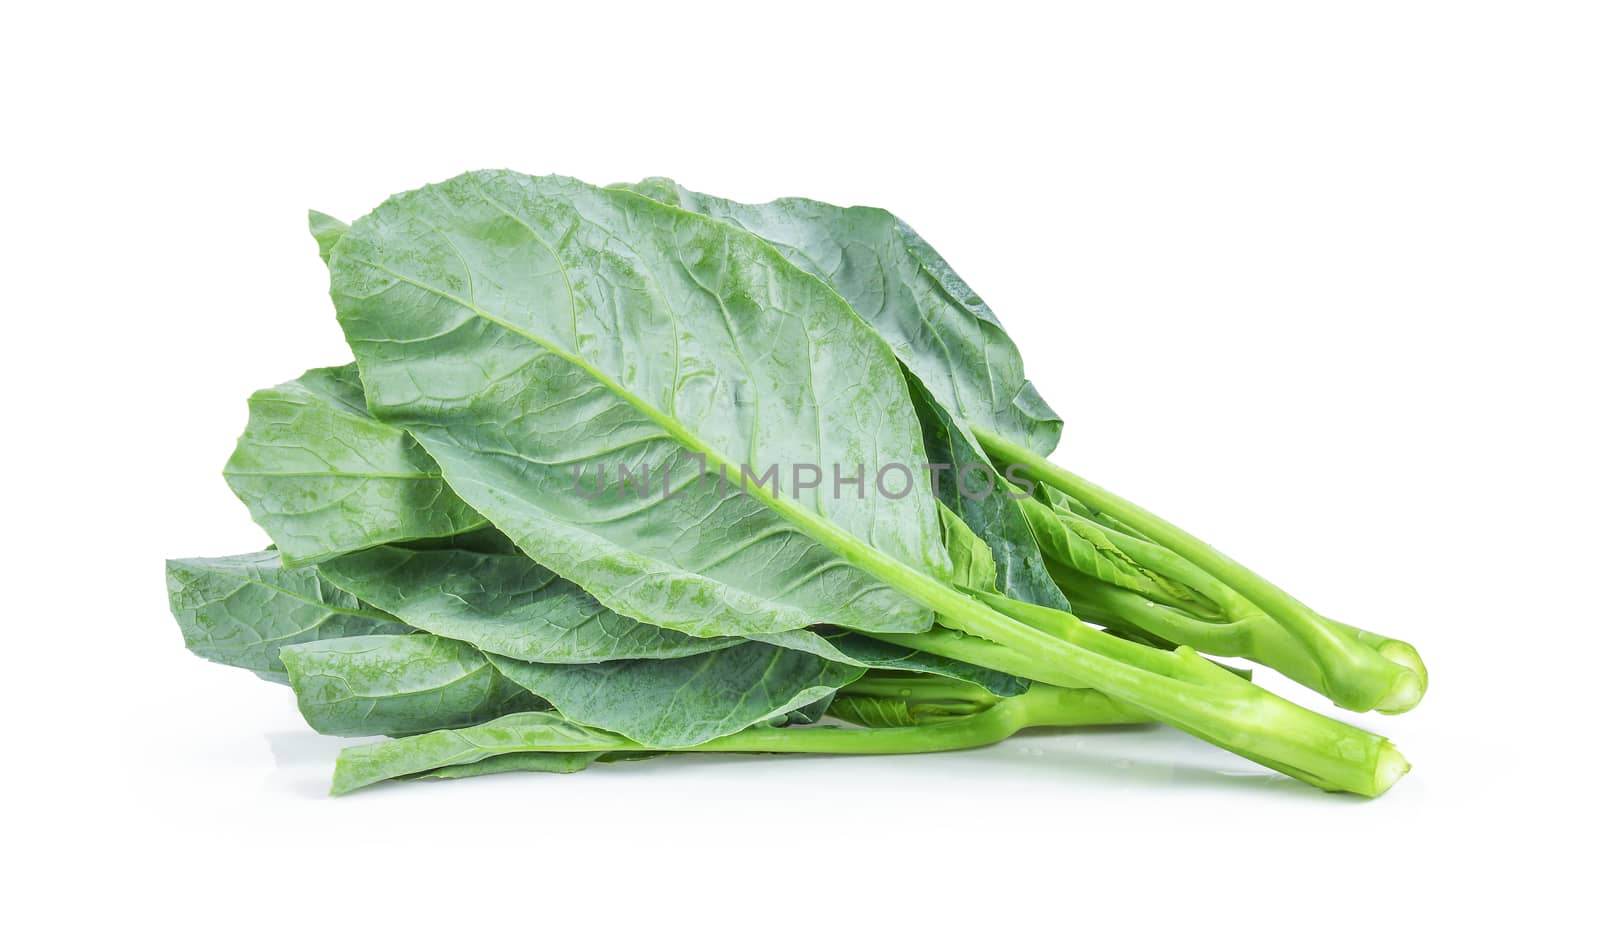 Chinese kale vegetable isolated on white background by sommai